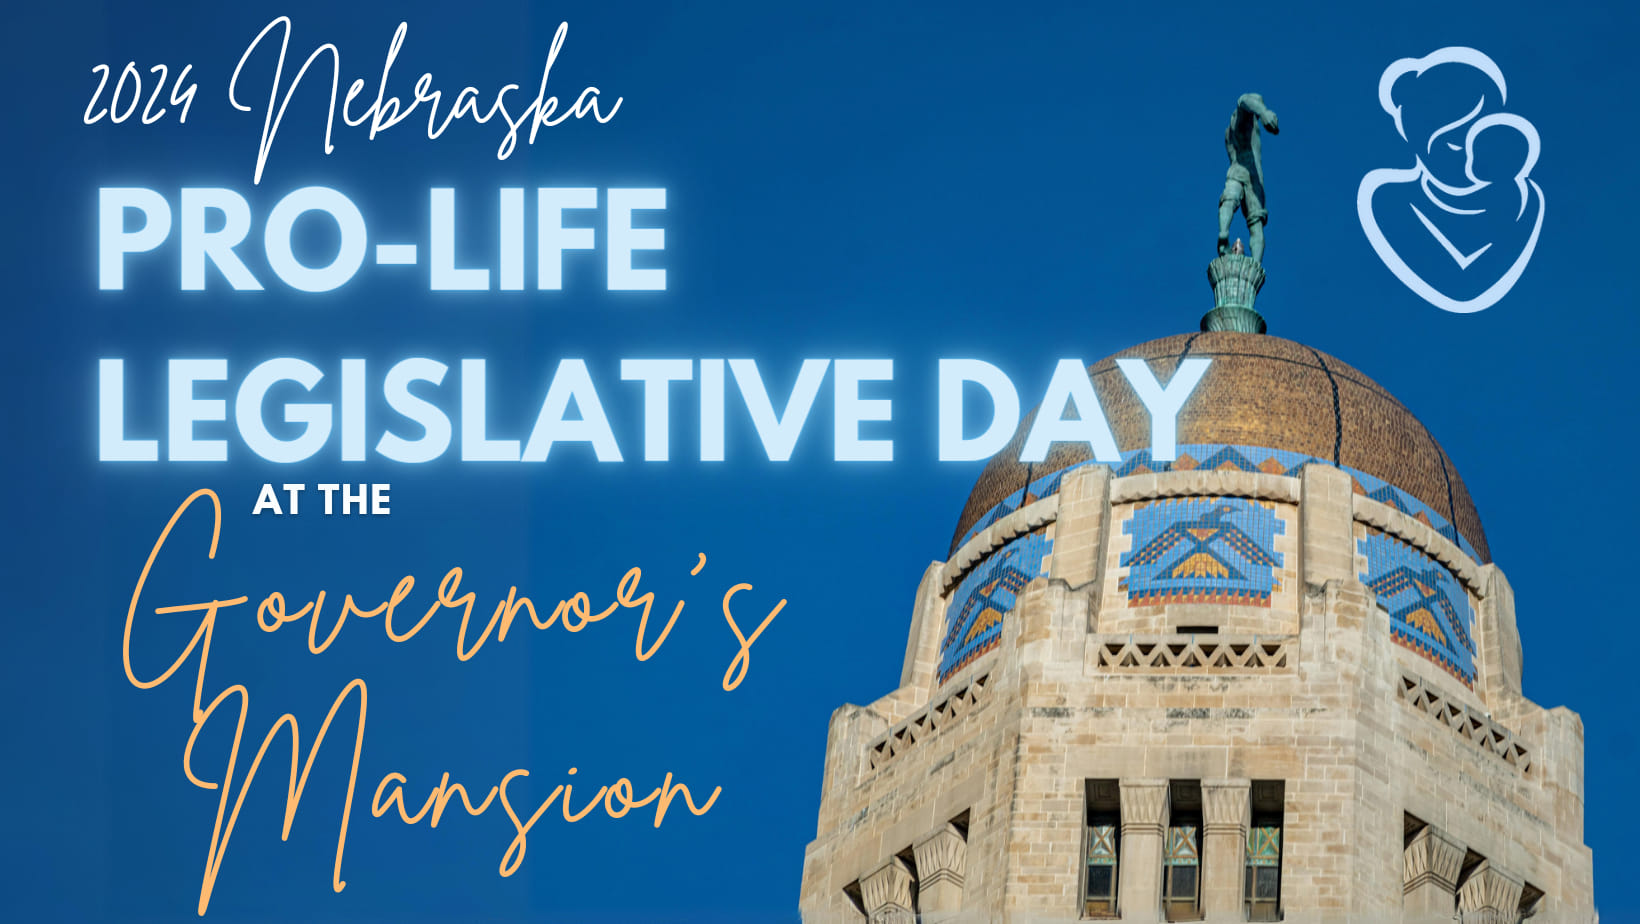 join us for Pro-Life Legislative Day at the Governors Mansion in Lincoln, NE on February 27th